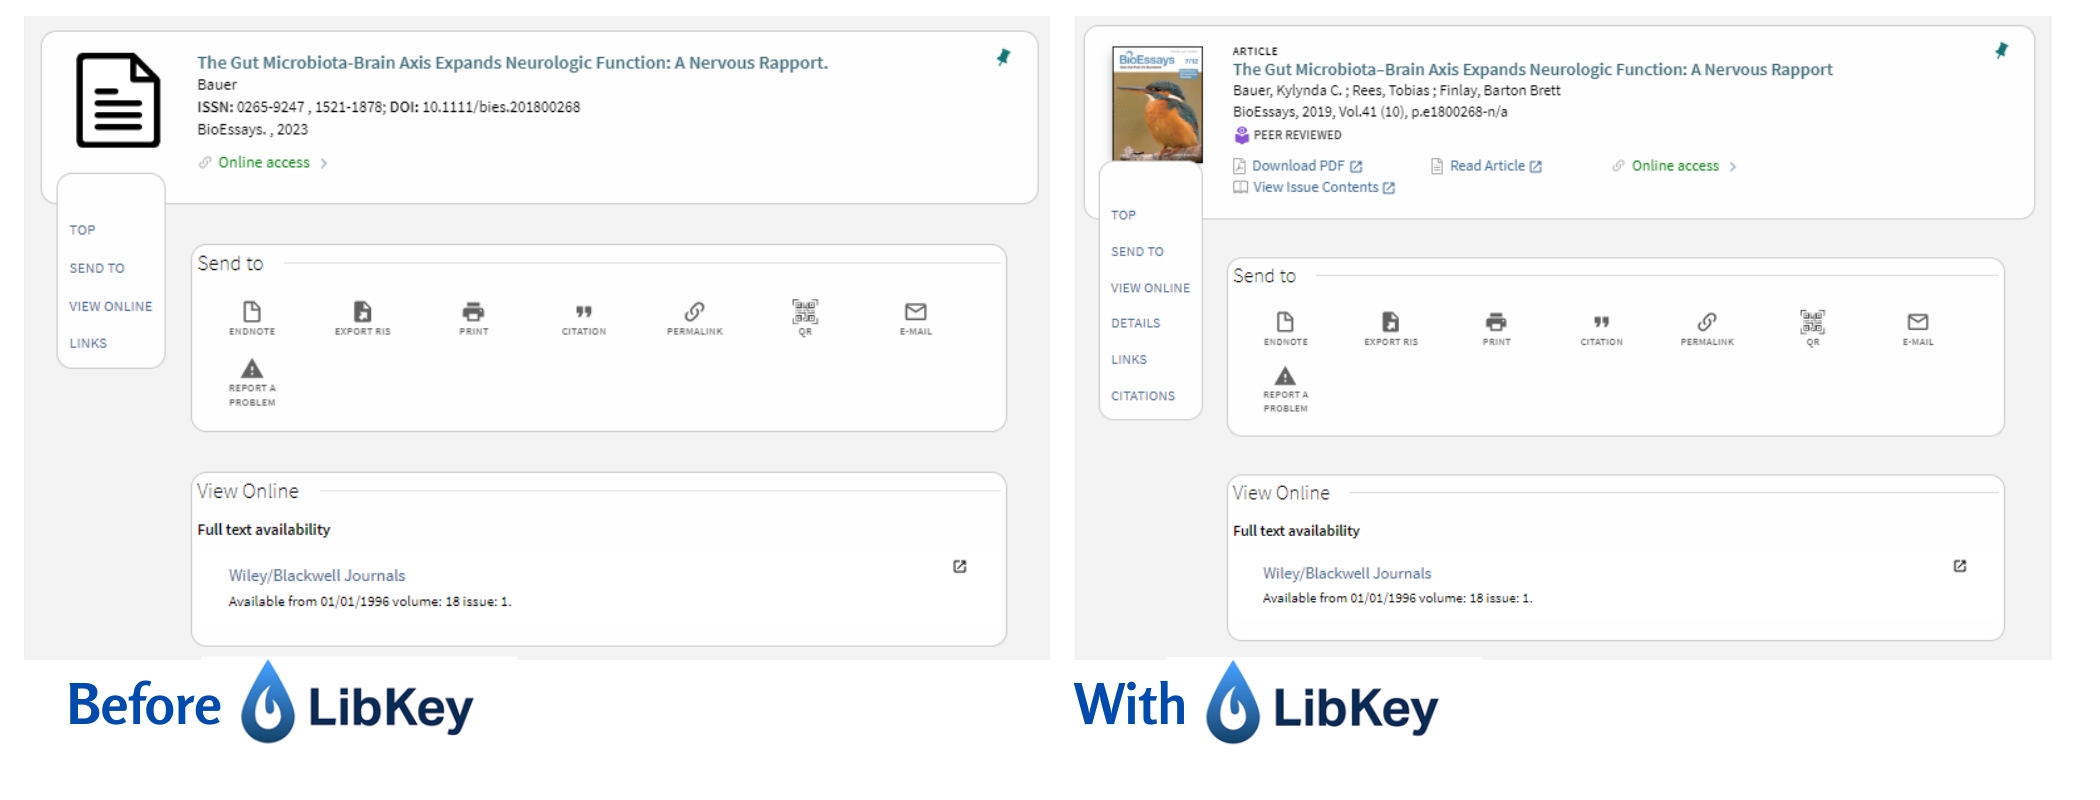 Two different browser screen shots displaying the visual difference before and after Libkey. Including more information about the creator of the item.